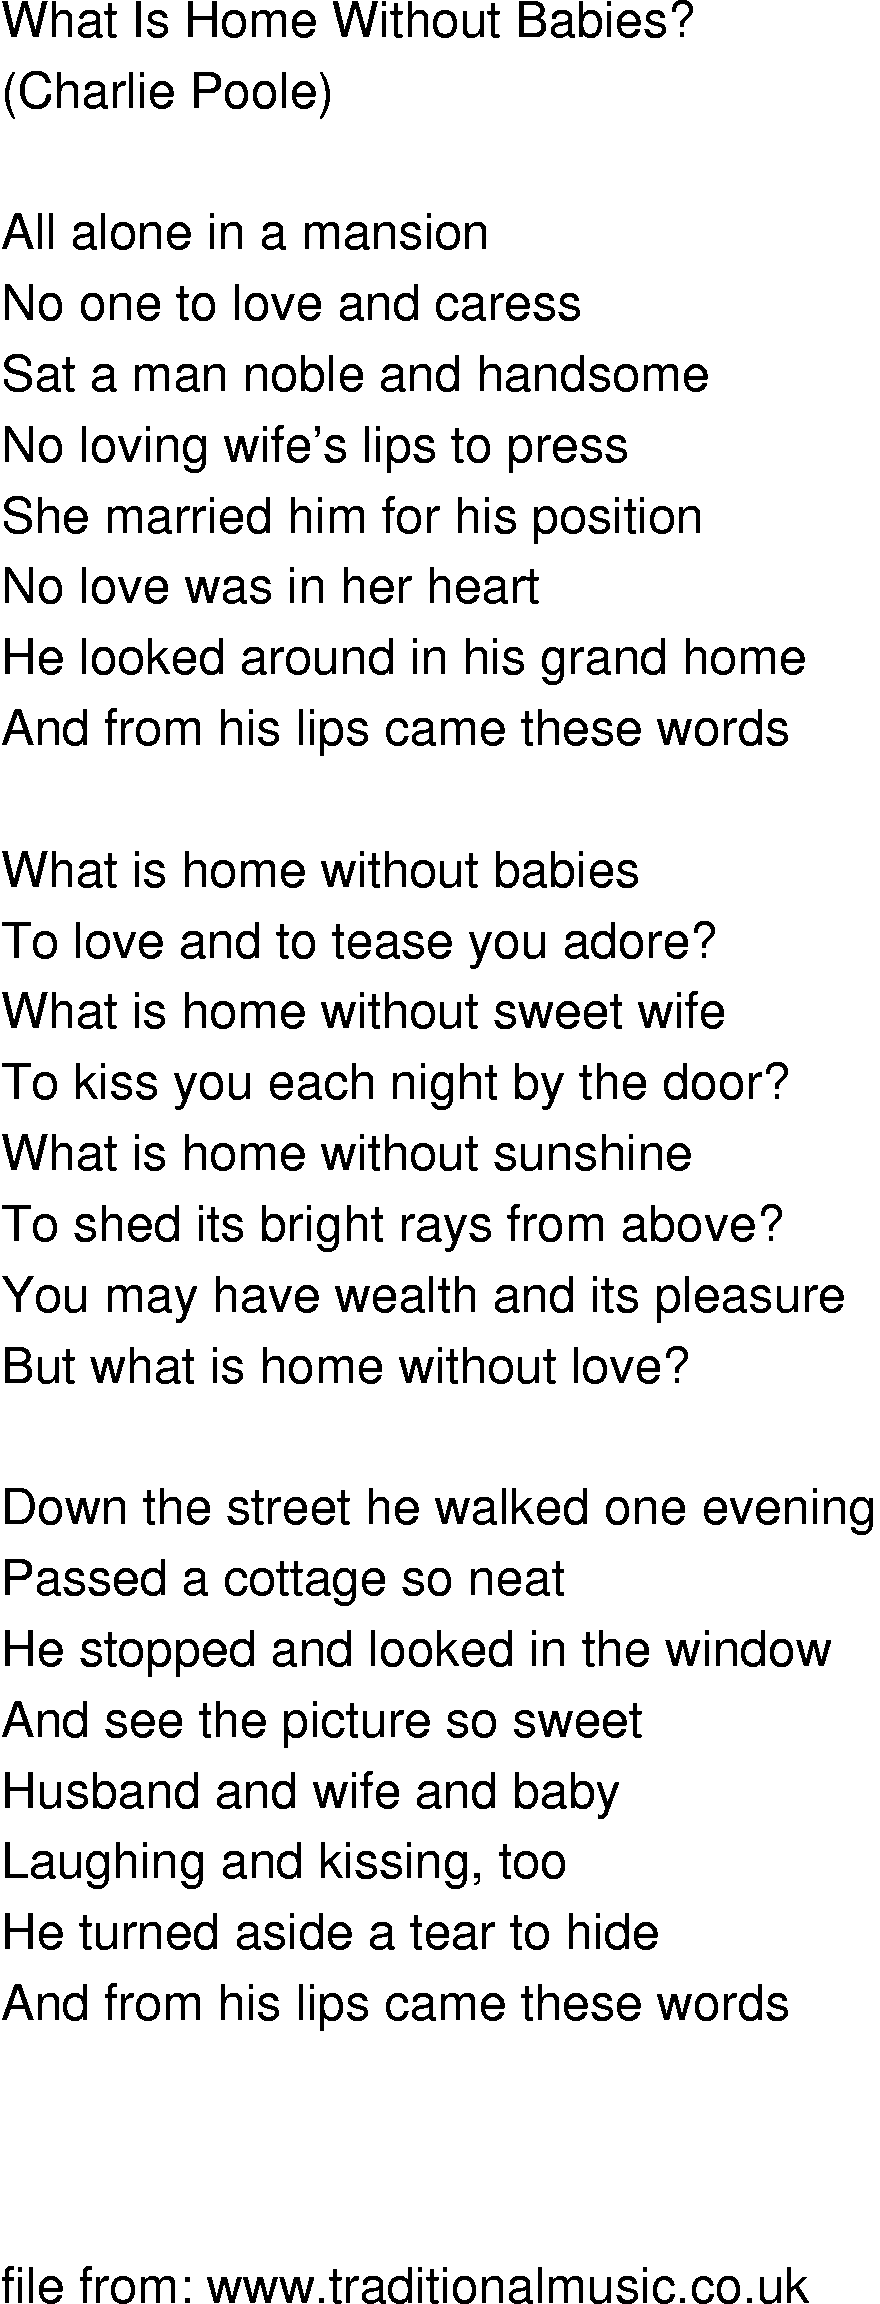 Old-Time (oldtimey) Song Lyrics - what is home without babies